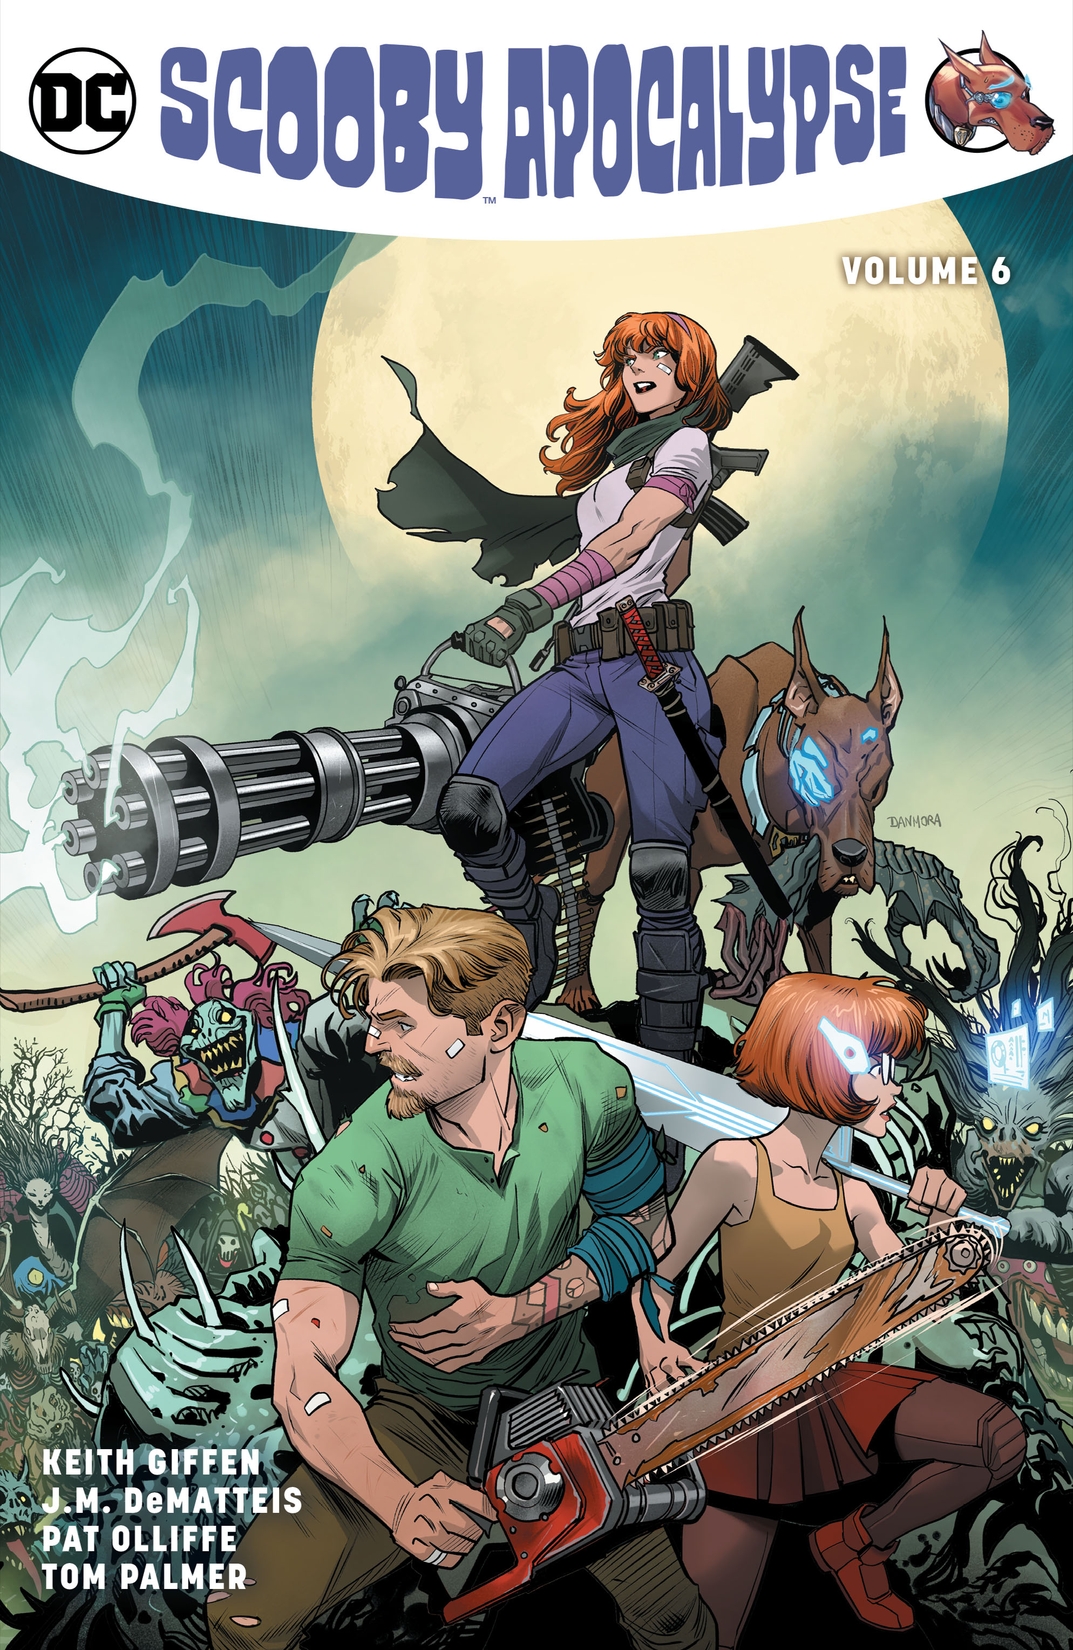 Scooby Apocalypse Vol. 6 preview images